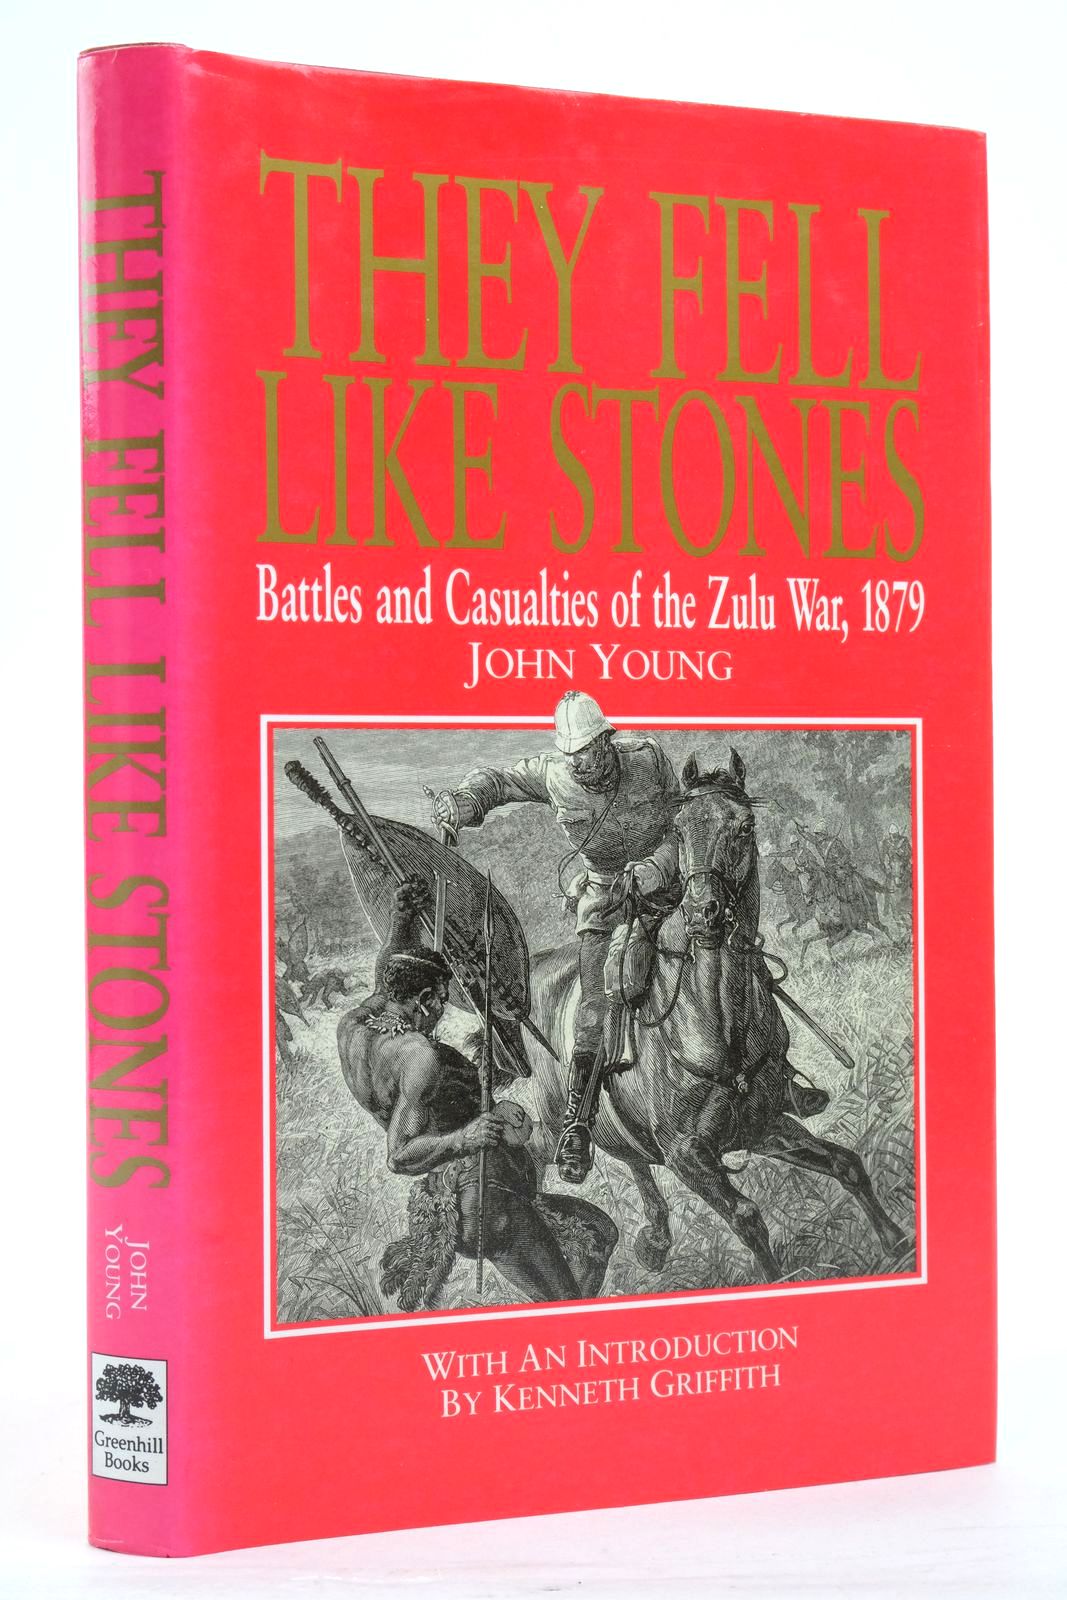 Photo of THEY FELL LIKE STONES BATTLES AND CASUALTIES OF THE ZULU WAR 1879- Stock Number: 2138035